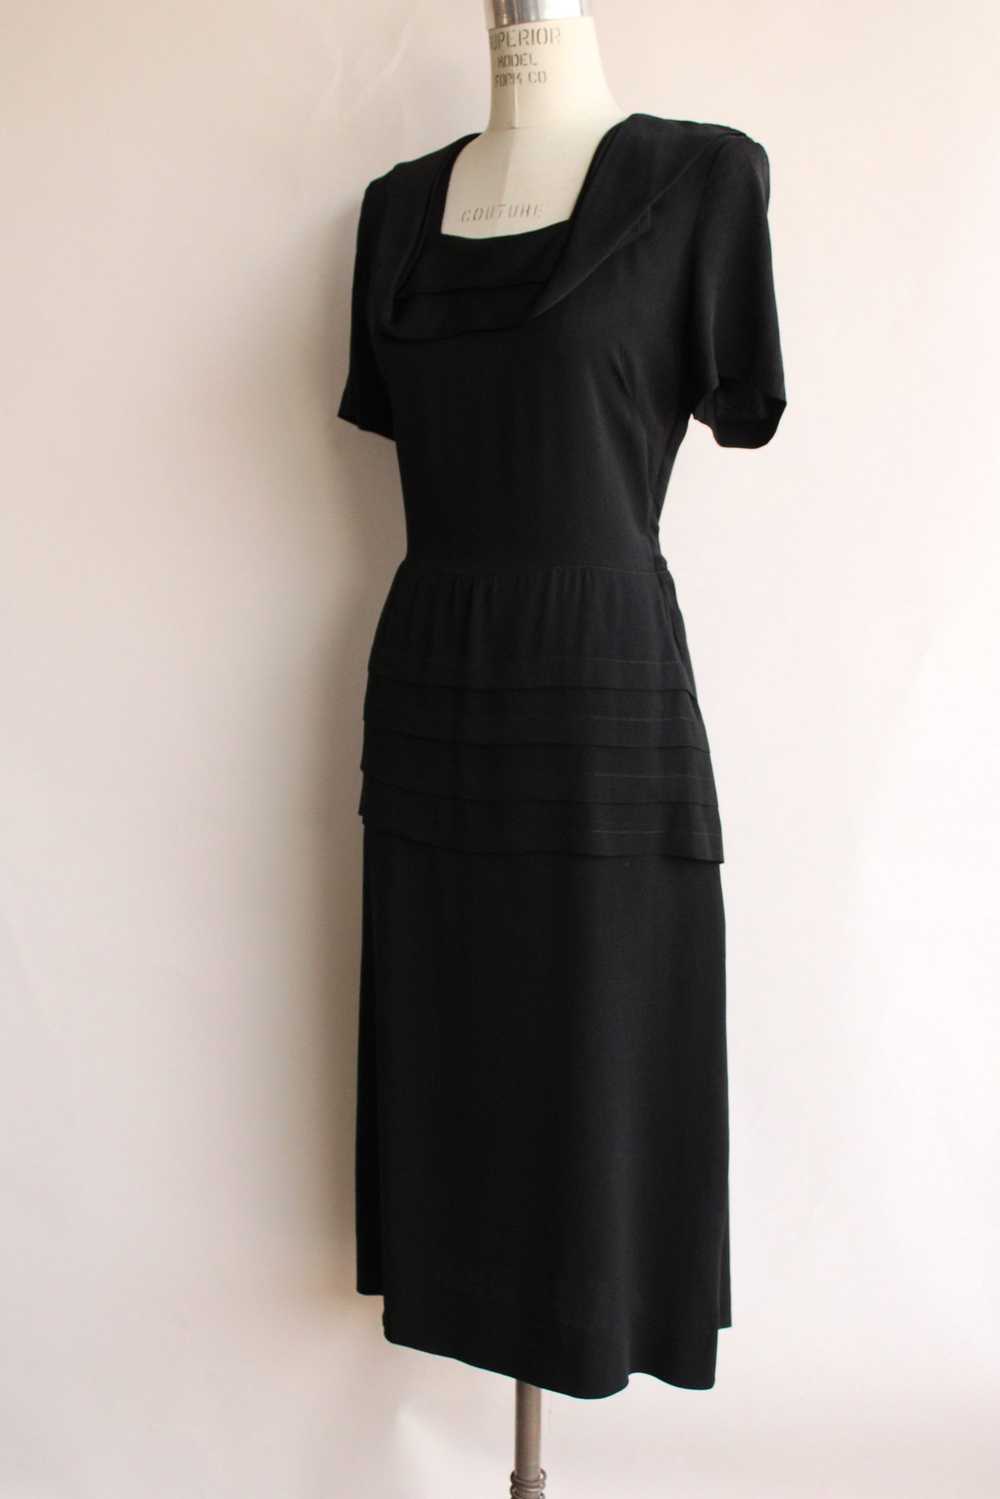 Vintage 1940s Black Rayon Dress With Square Shawl… - image 6